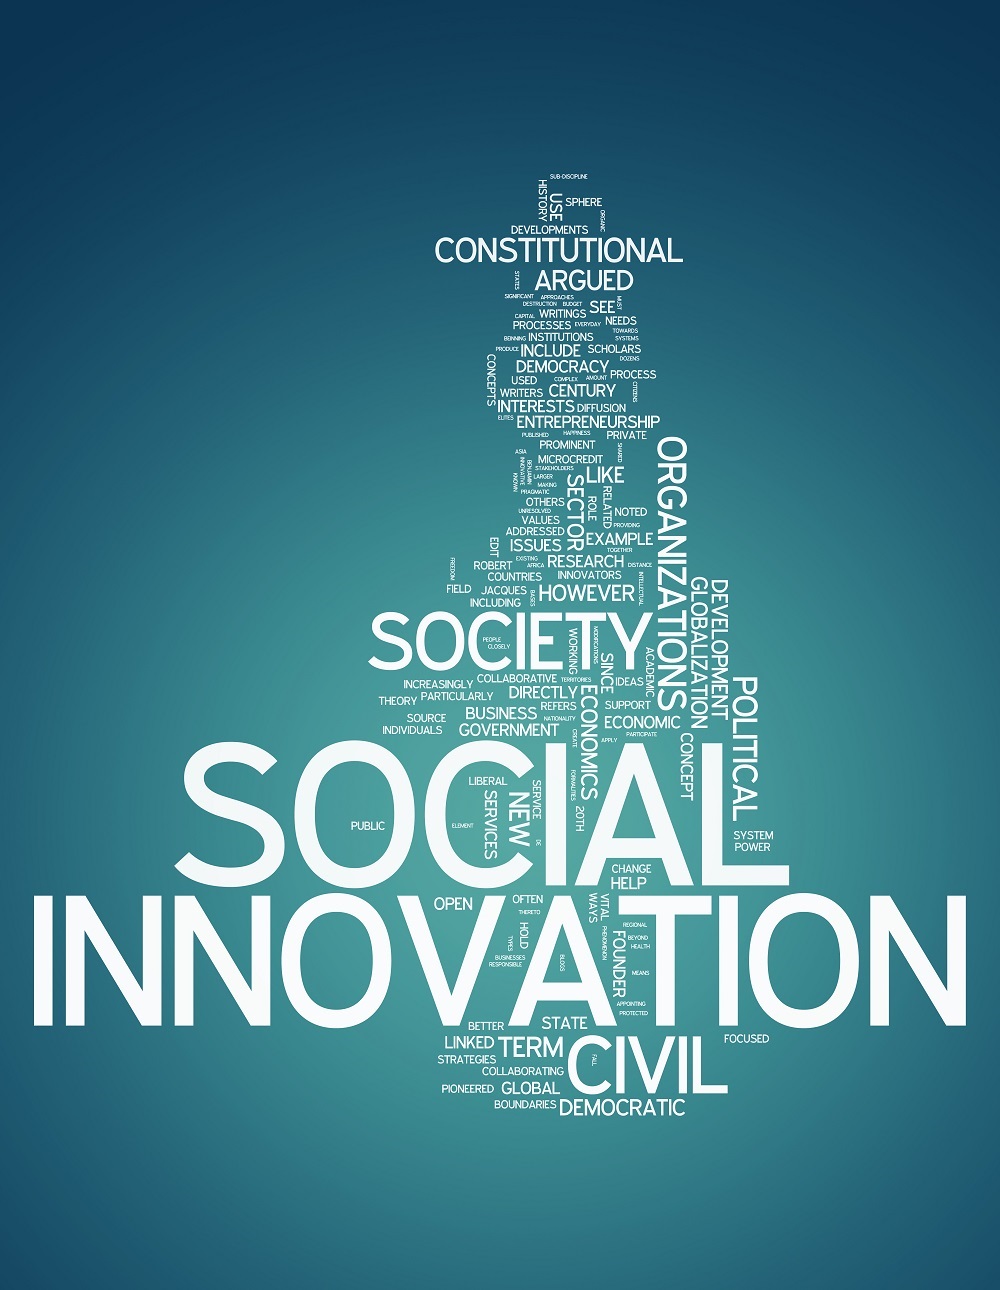 Fostering social innovation in the European Union